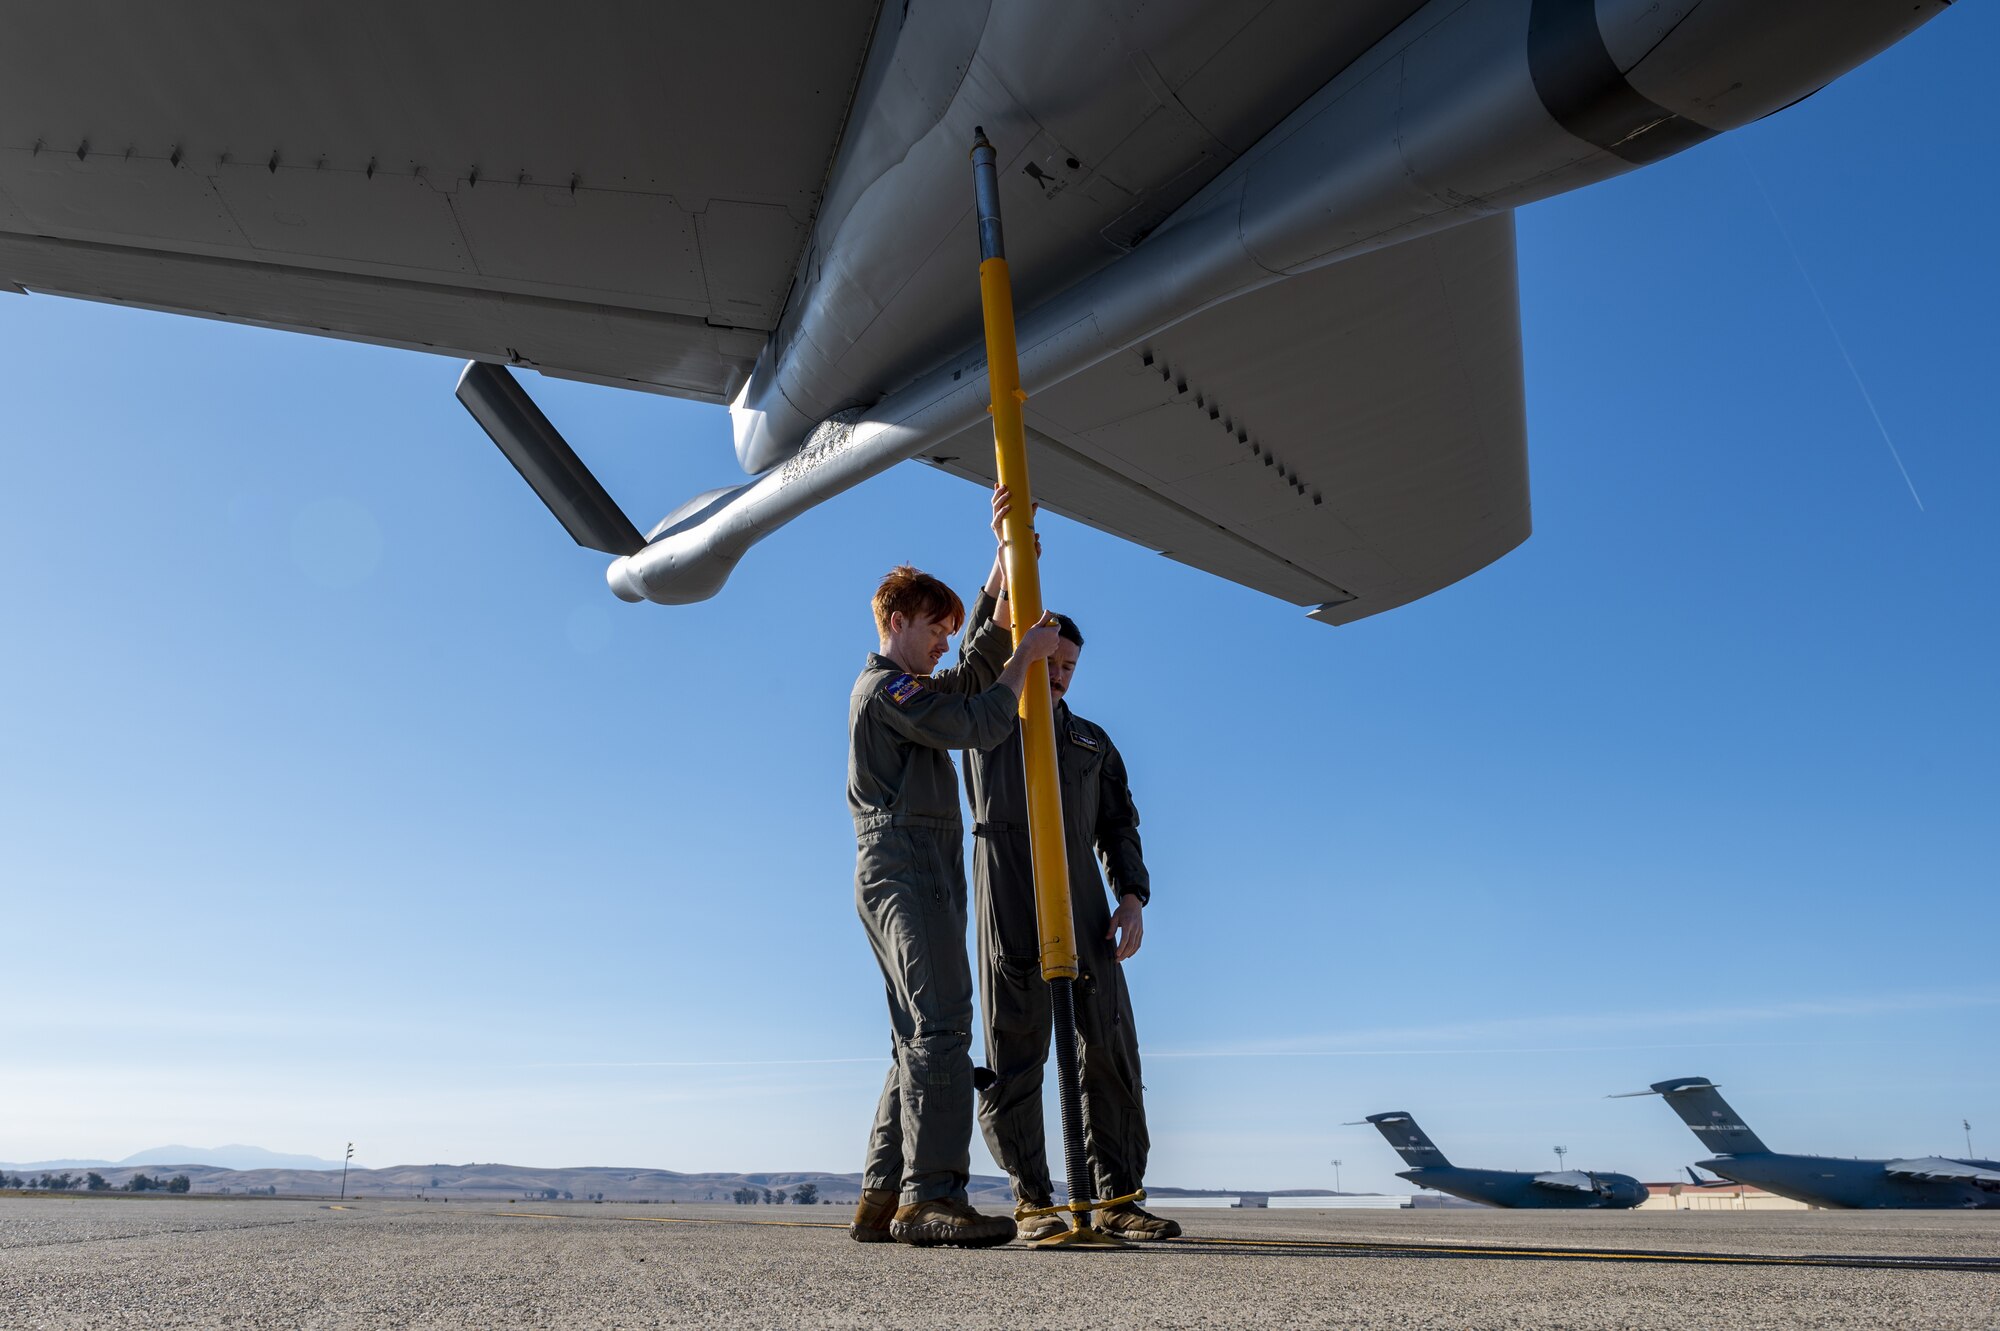 U.S. Air Force Senior Airman Matthew Ronnfeldt, 97th Air Refueling Squadron in-flight refueling specialist, and Senior Airman Dakota Griffis, 384th ARS in-flight refueling specialist, install a tail stand prior to receiving cargo on a KC-135 Stratotanker aircraft at Travis Air Force Base, California, Nov. 19, 2022. The mission required the crew to fly to Travis AFB where they loaded 8,000 pounds of cargo and supplies, followed by providing air refueling training for a C-17 Globemaster III aircraft from JBPHH. (U.S. Air Force photo by Staff Sgt. Lawrence Sena)